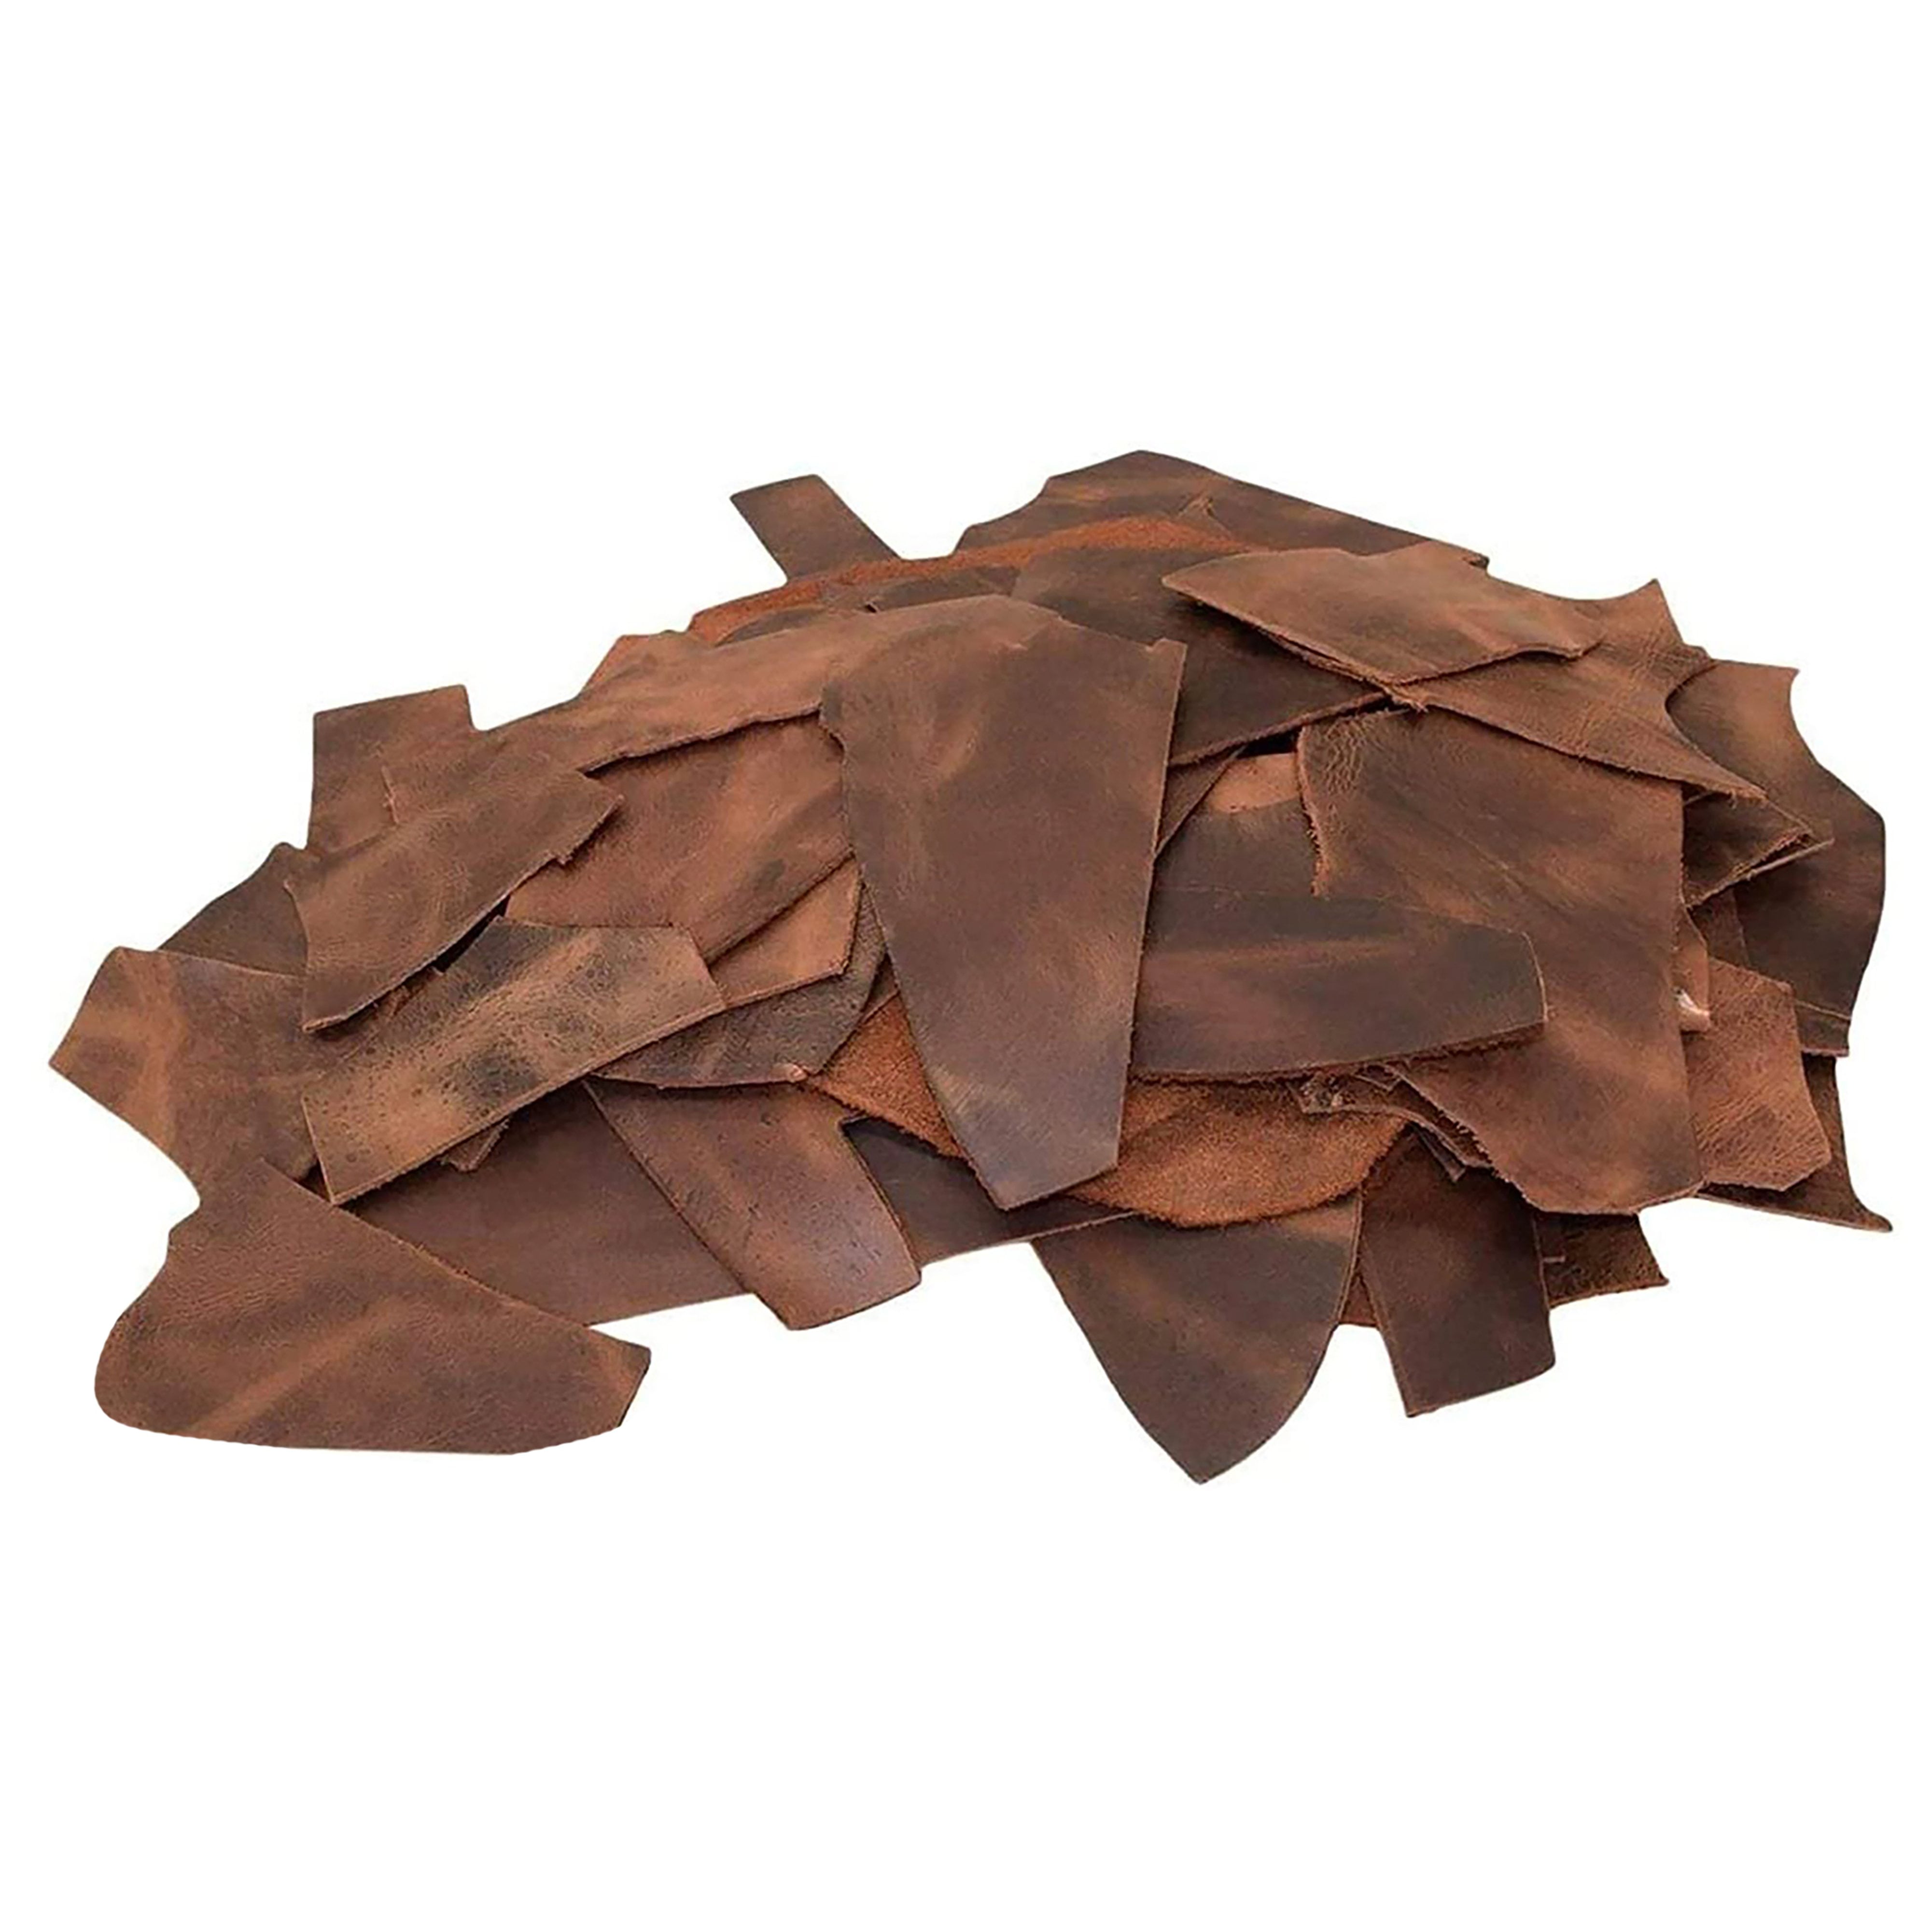 Leather Scrap Crafts 20 lbs Leather Scrap - Large Pieces of Full Grain  Leather Cowhide Remnants Bag - Design & Make Crafts - Mixed Colors